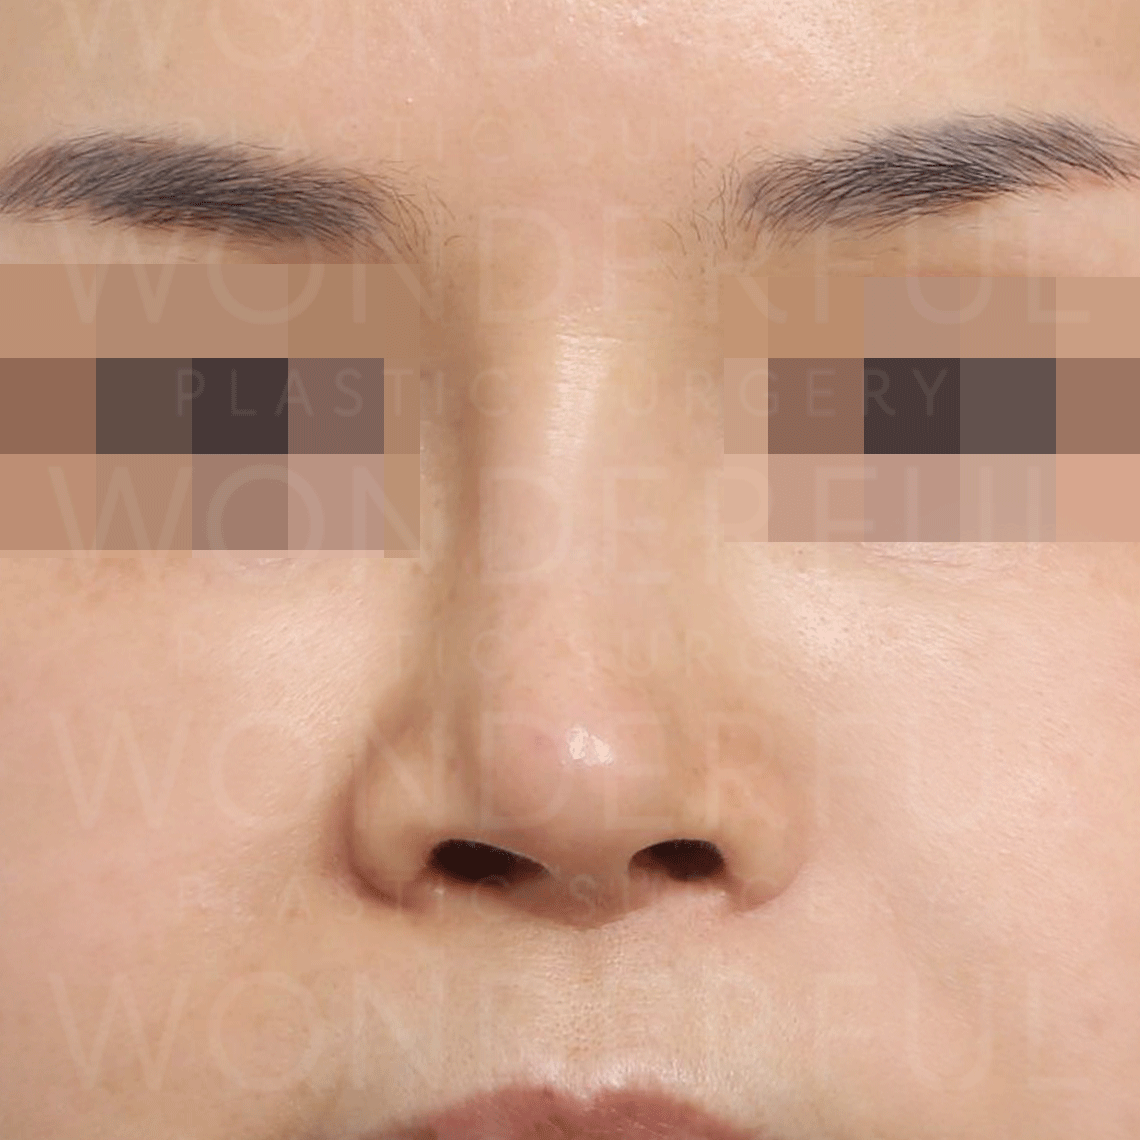 wonderful-plastic-surgery-hospital-korea-deviated-nose-rhinoplasty-before-after-results-before-1